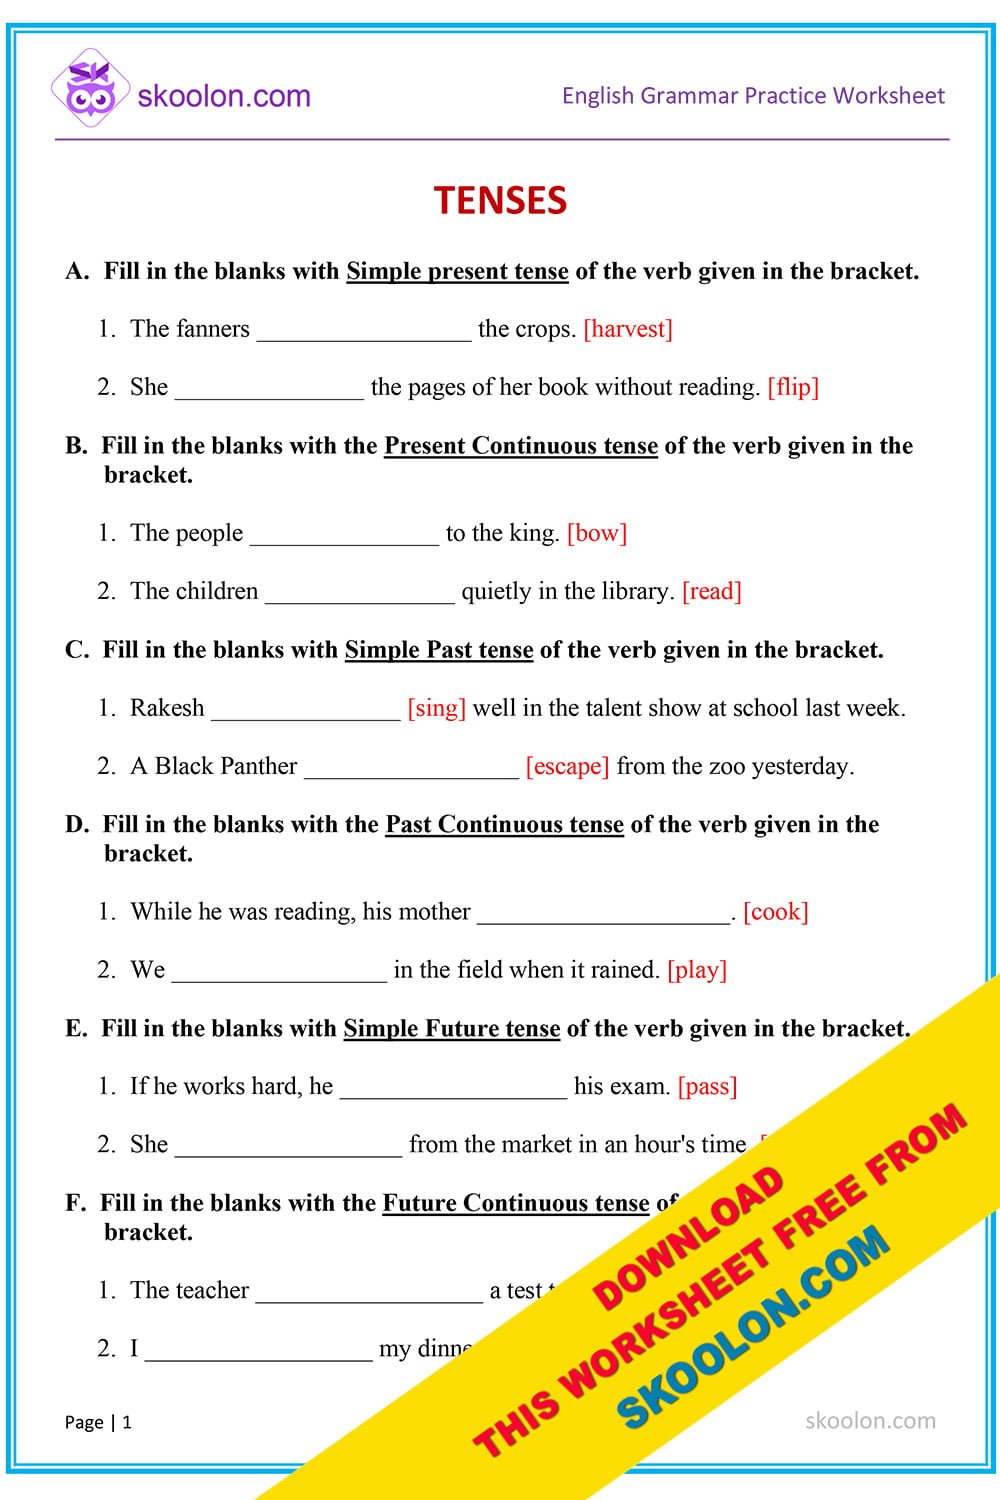 cbse-english-grammar-exercises-for-class-2-english-worksheets